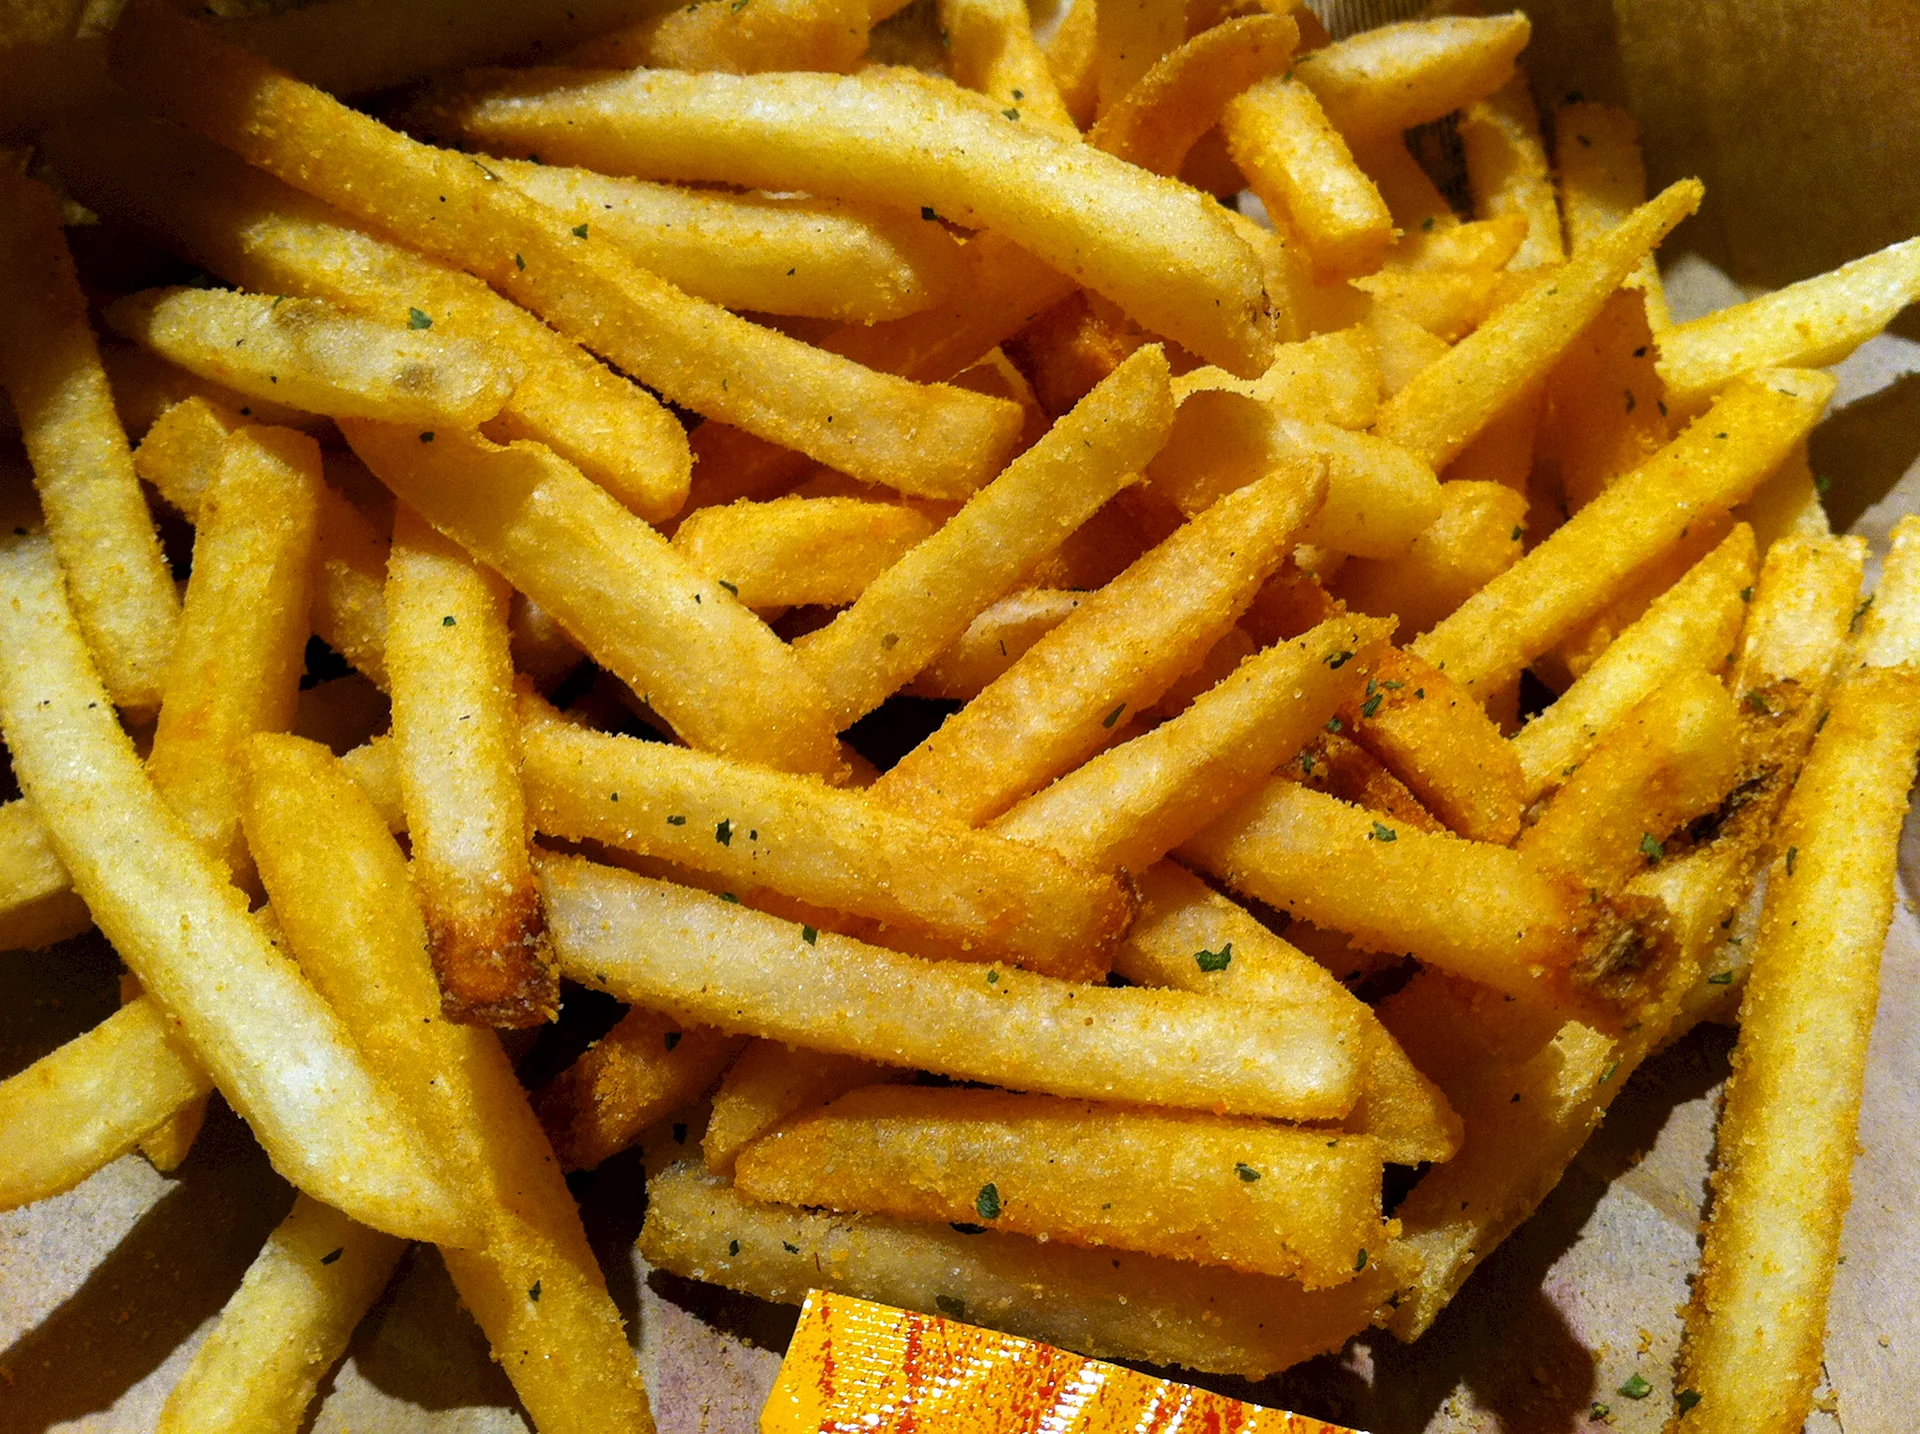 French Fries Wallpaper